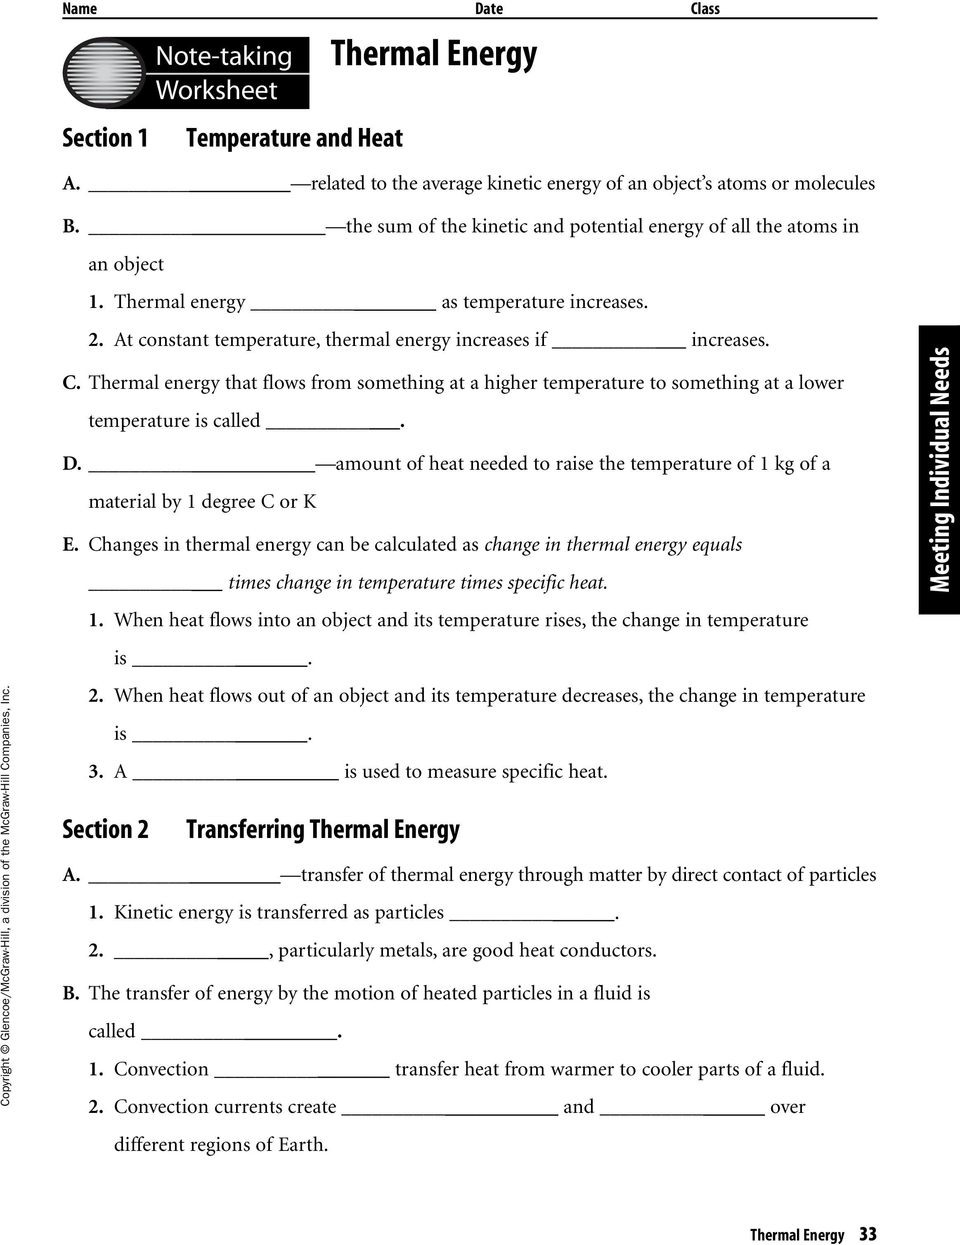 thermal-energy-note-taking-worksheet-answers-db-excel